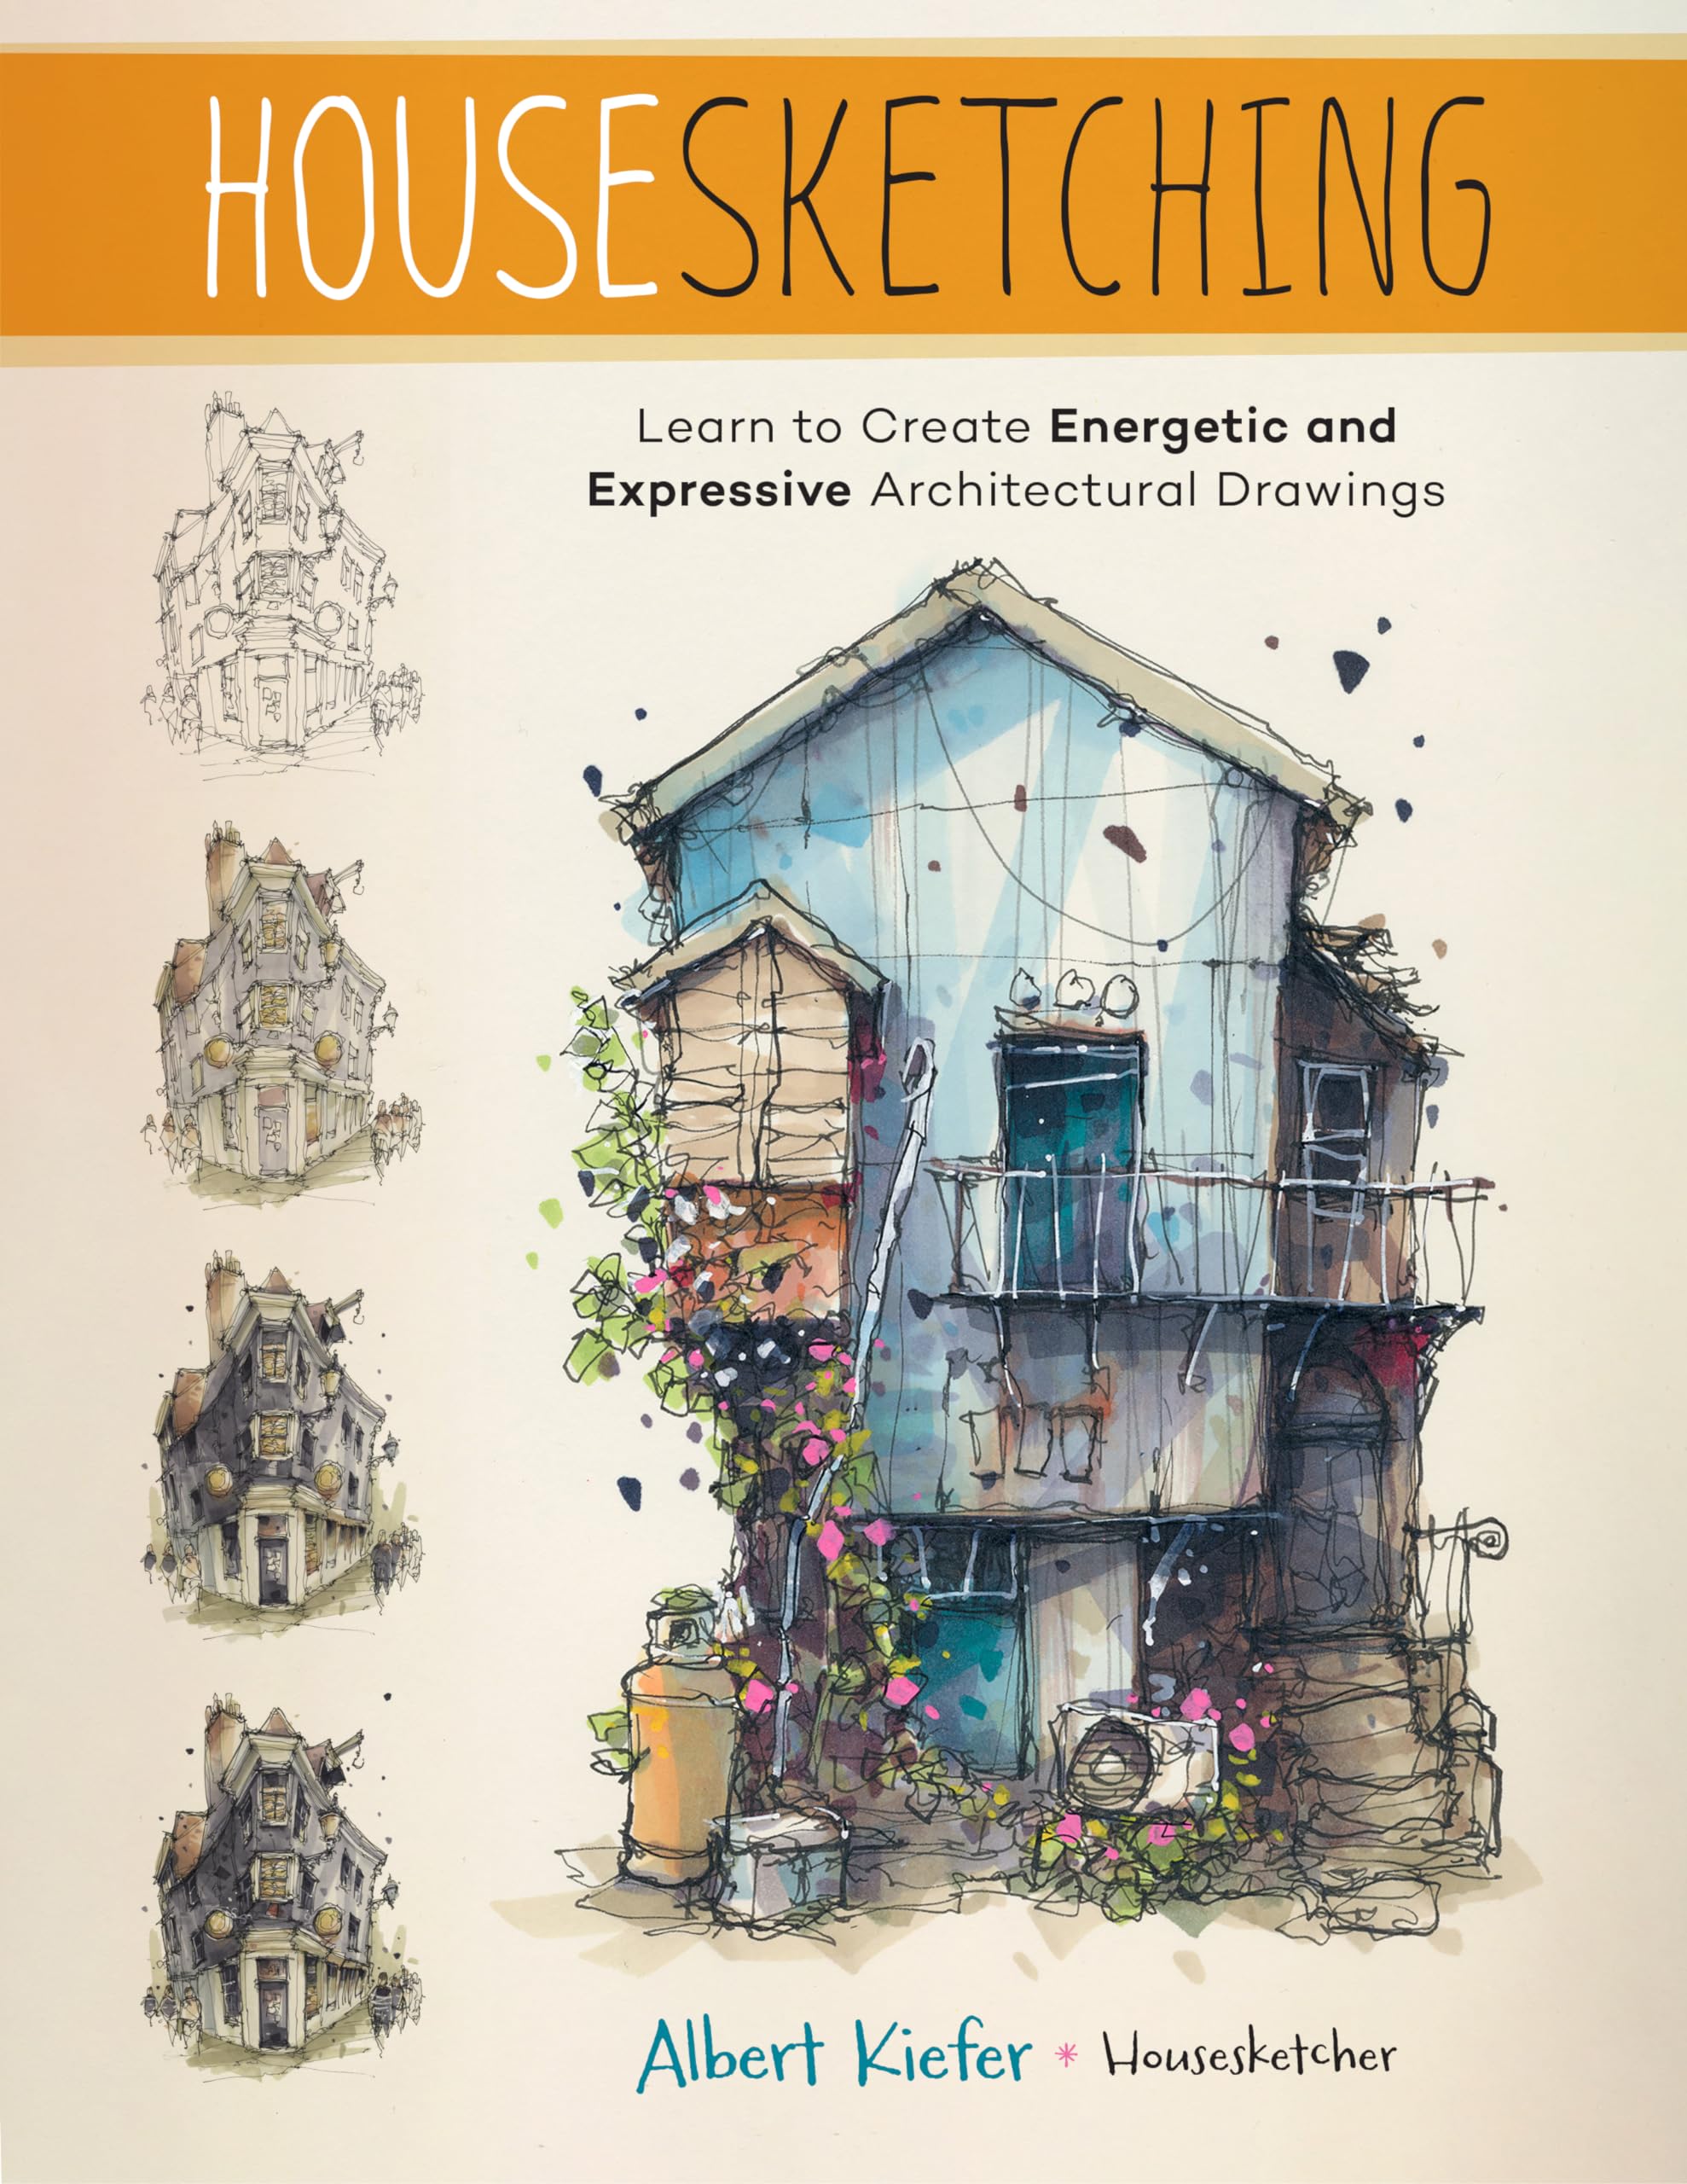 Housesketching: Create Energetic and Expressive Architectural Drawings